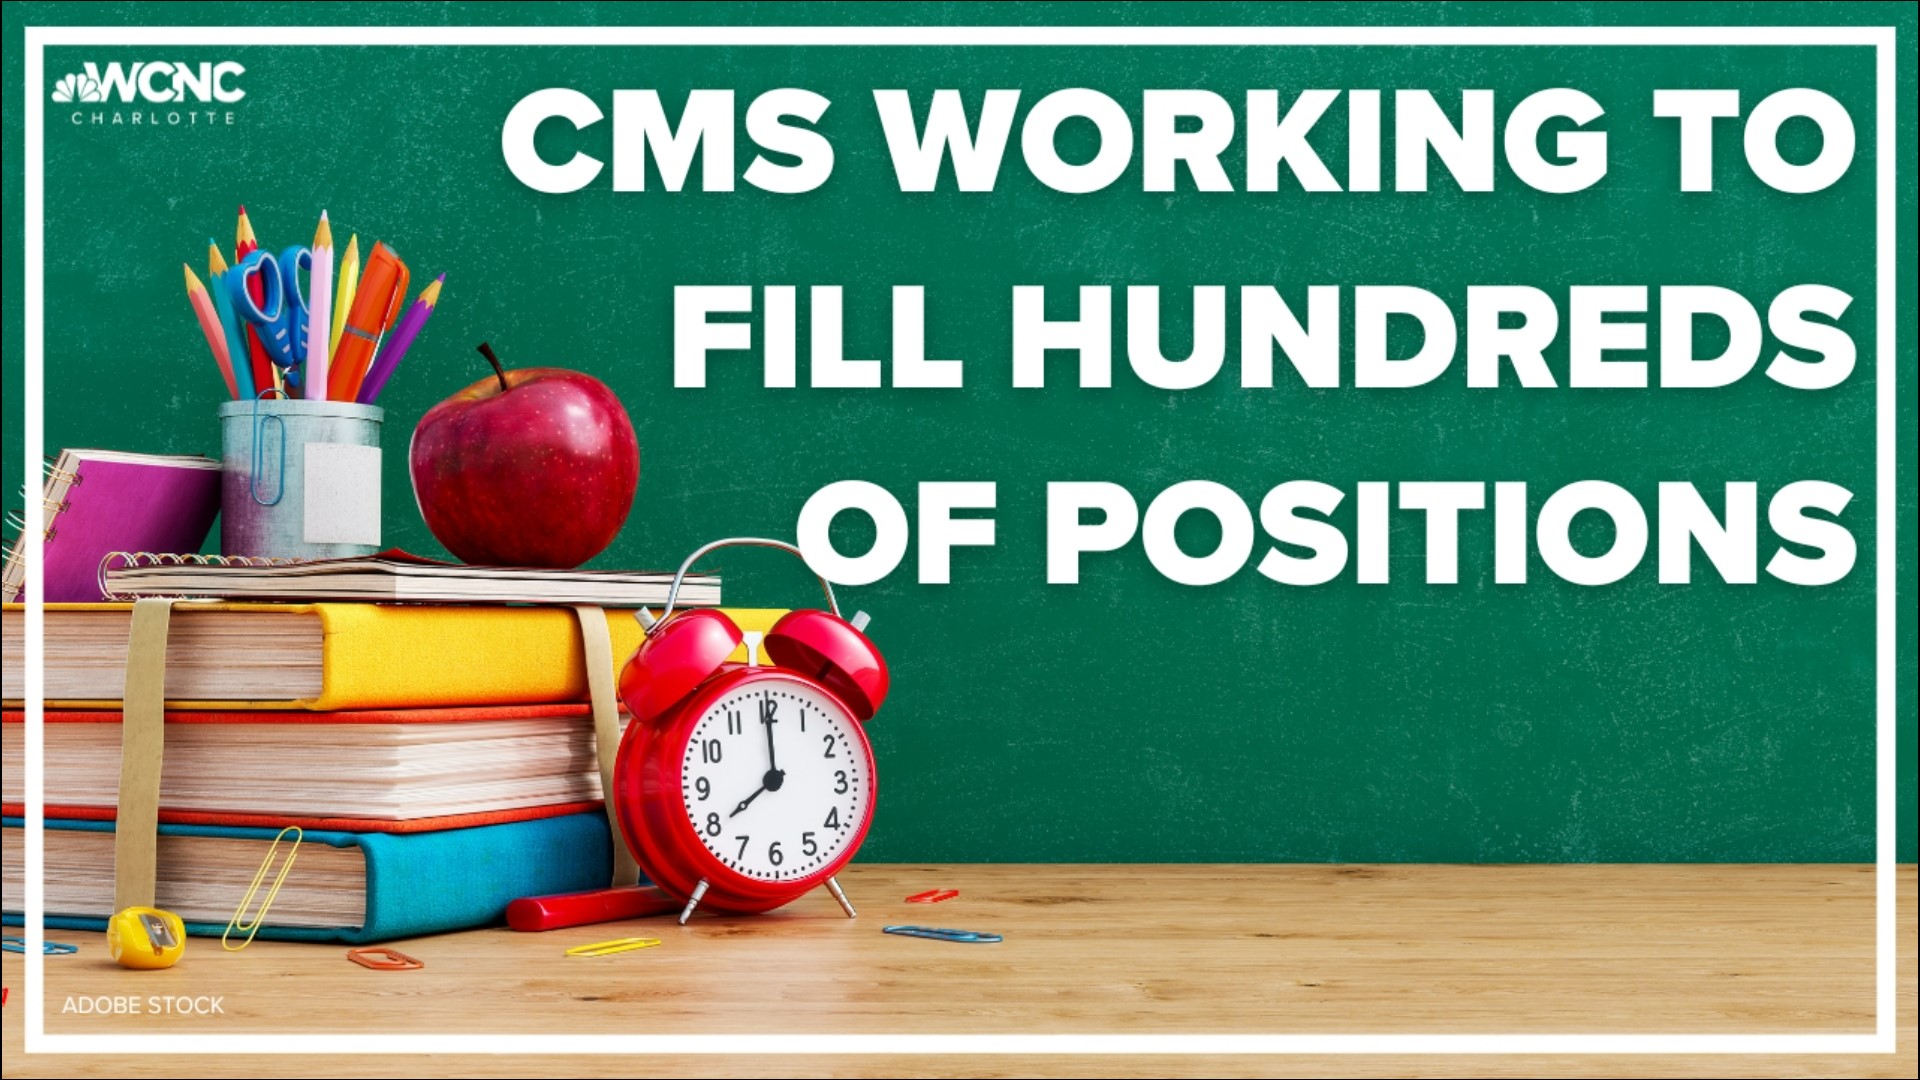 CMS has less than a month to fill hundreds of positions including teachers, nutrition workers, custodians and bus drivers before the school year begins.